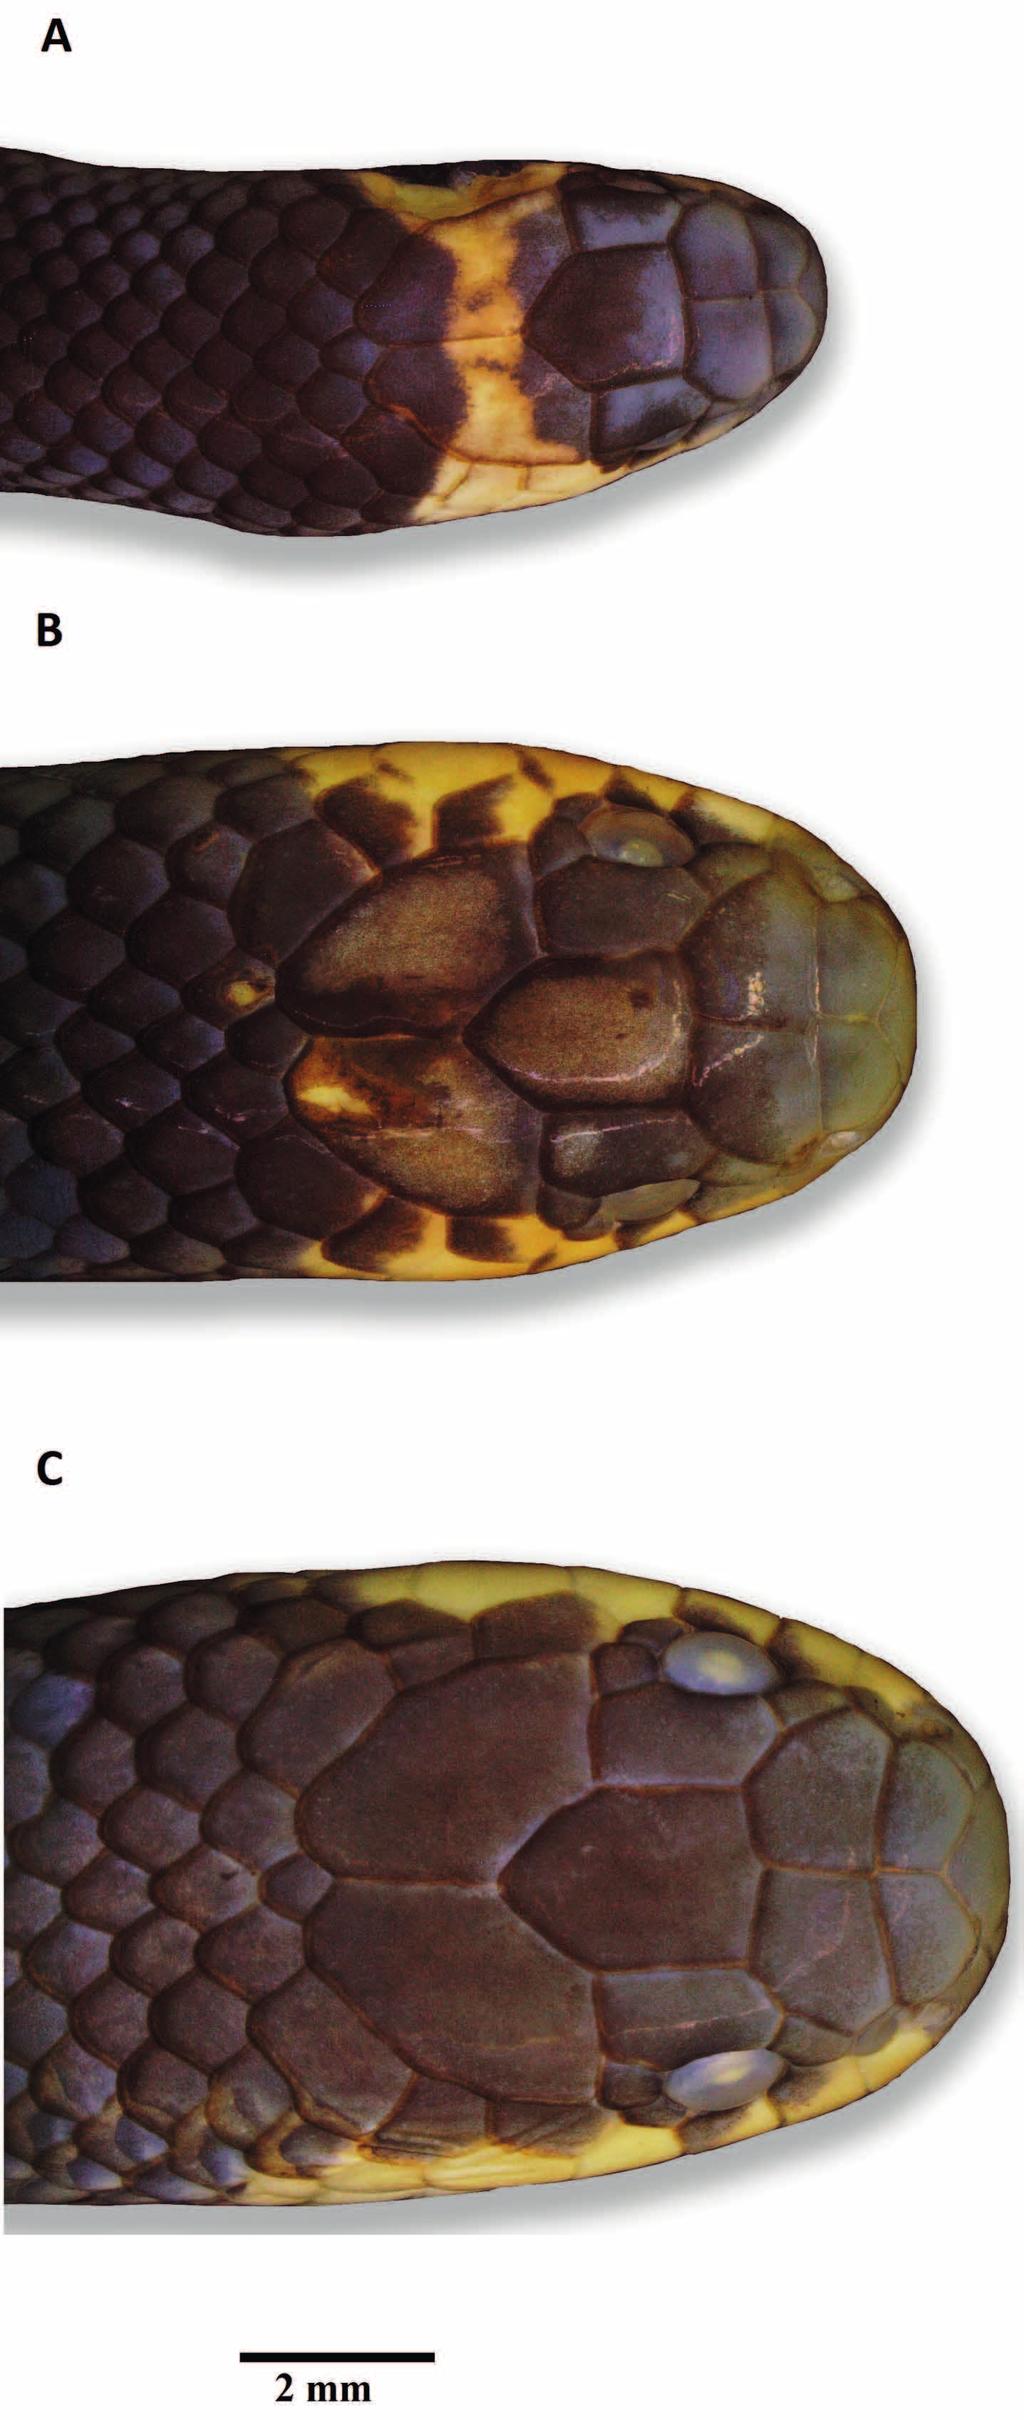 New species of Micrurus from the Amazon to snout distance (2.8 mm) 1.1 frontal length; supraoculars almost rectangular (1.2 2.5 mm); parietals longer than wide (2.55 3.